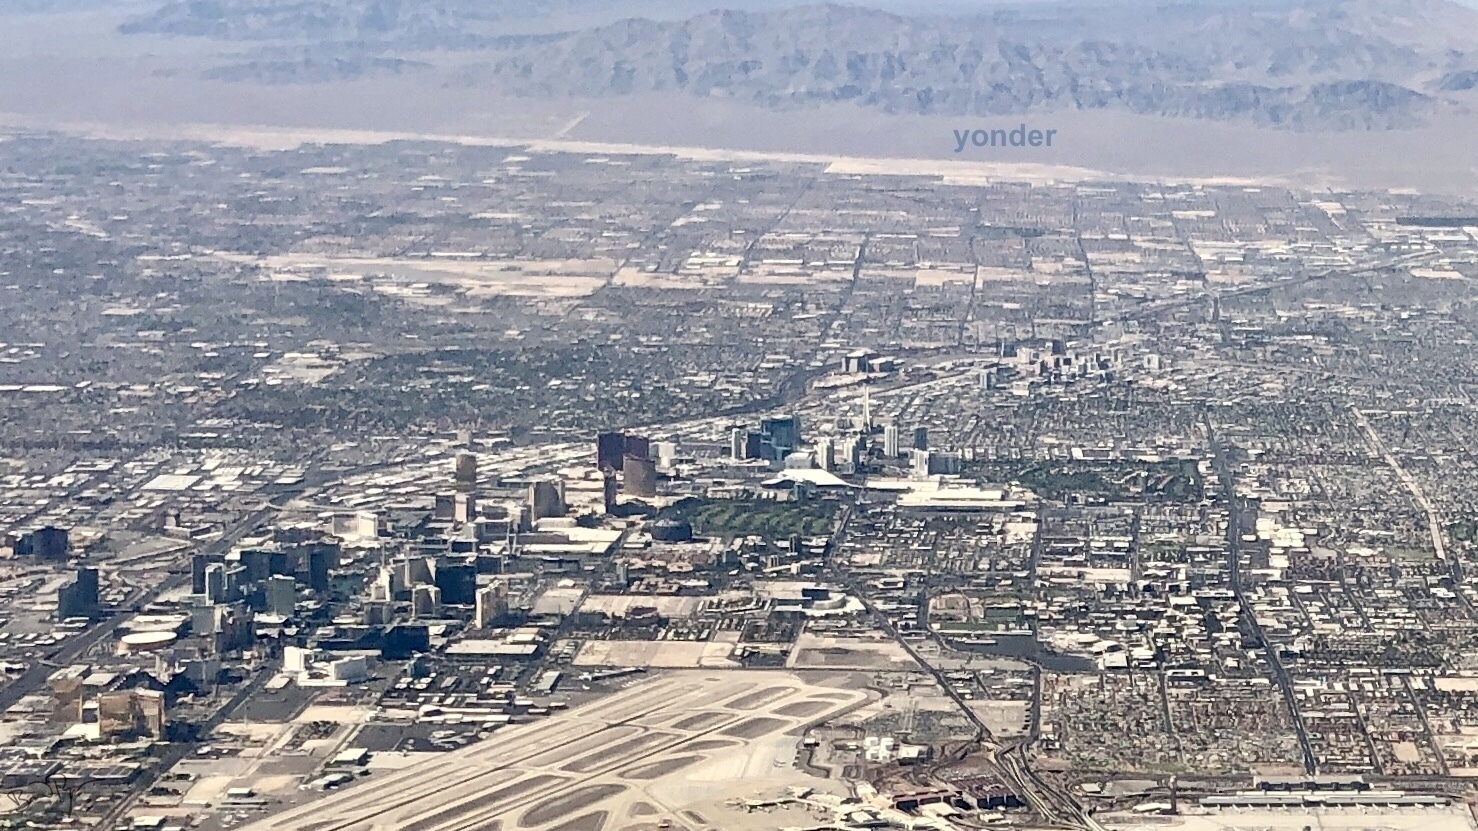 Aerial view of Las Vegas valley, looking north from airport